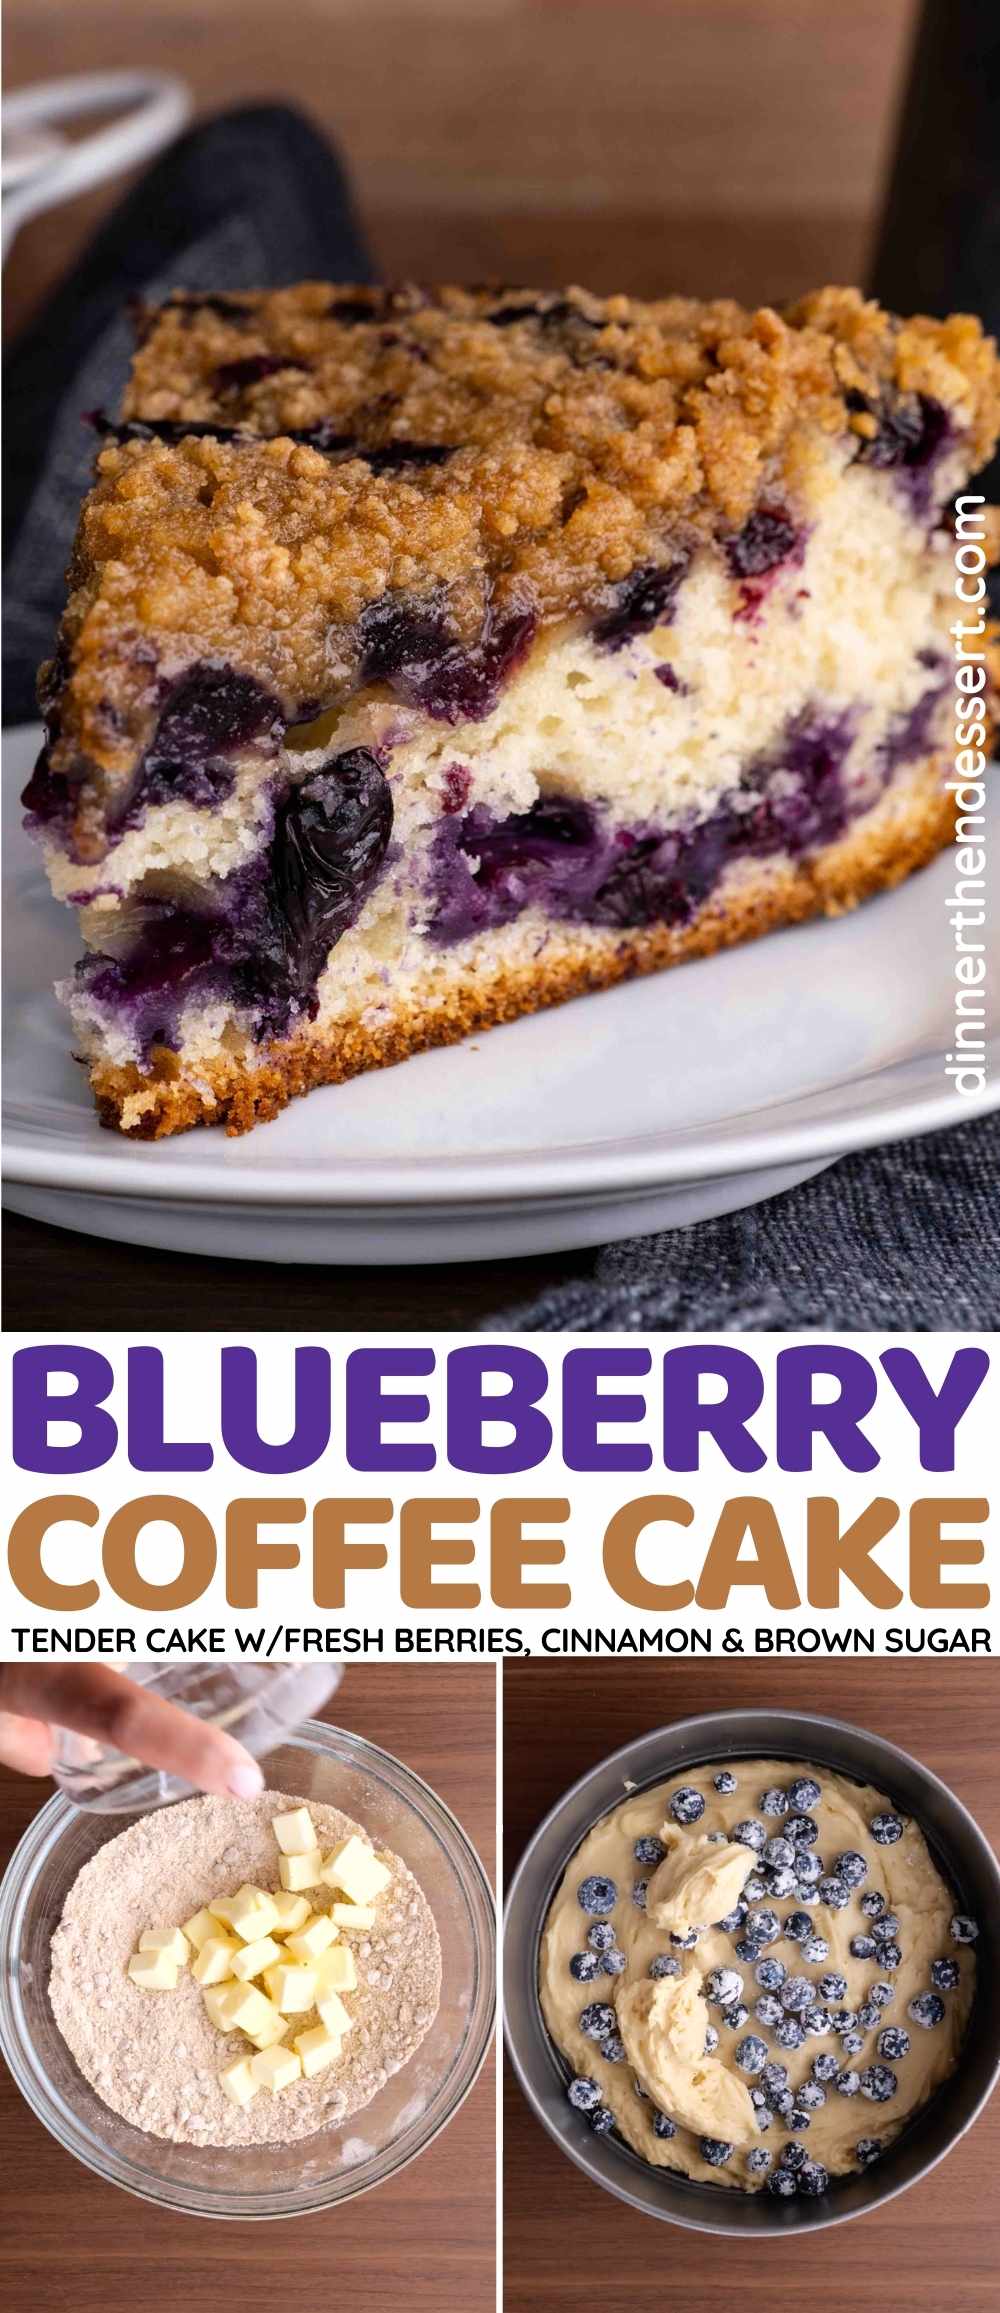 Blueberry Coffee Cake Collage